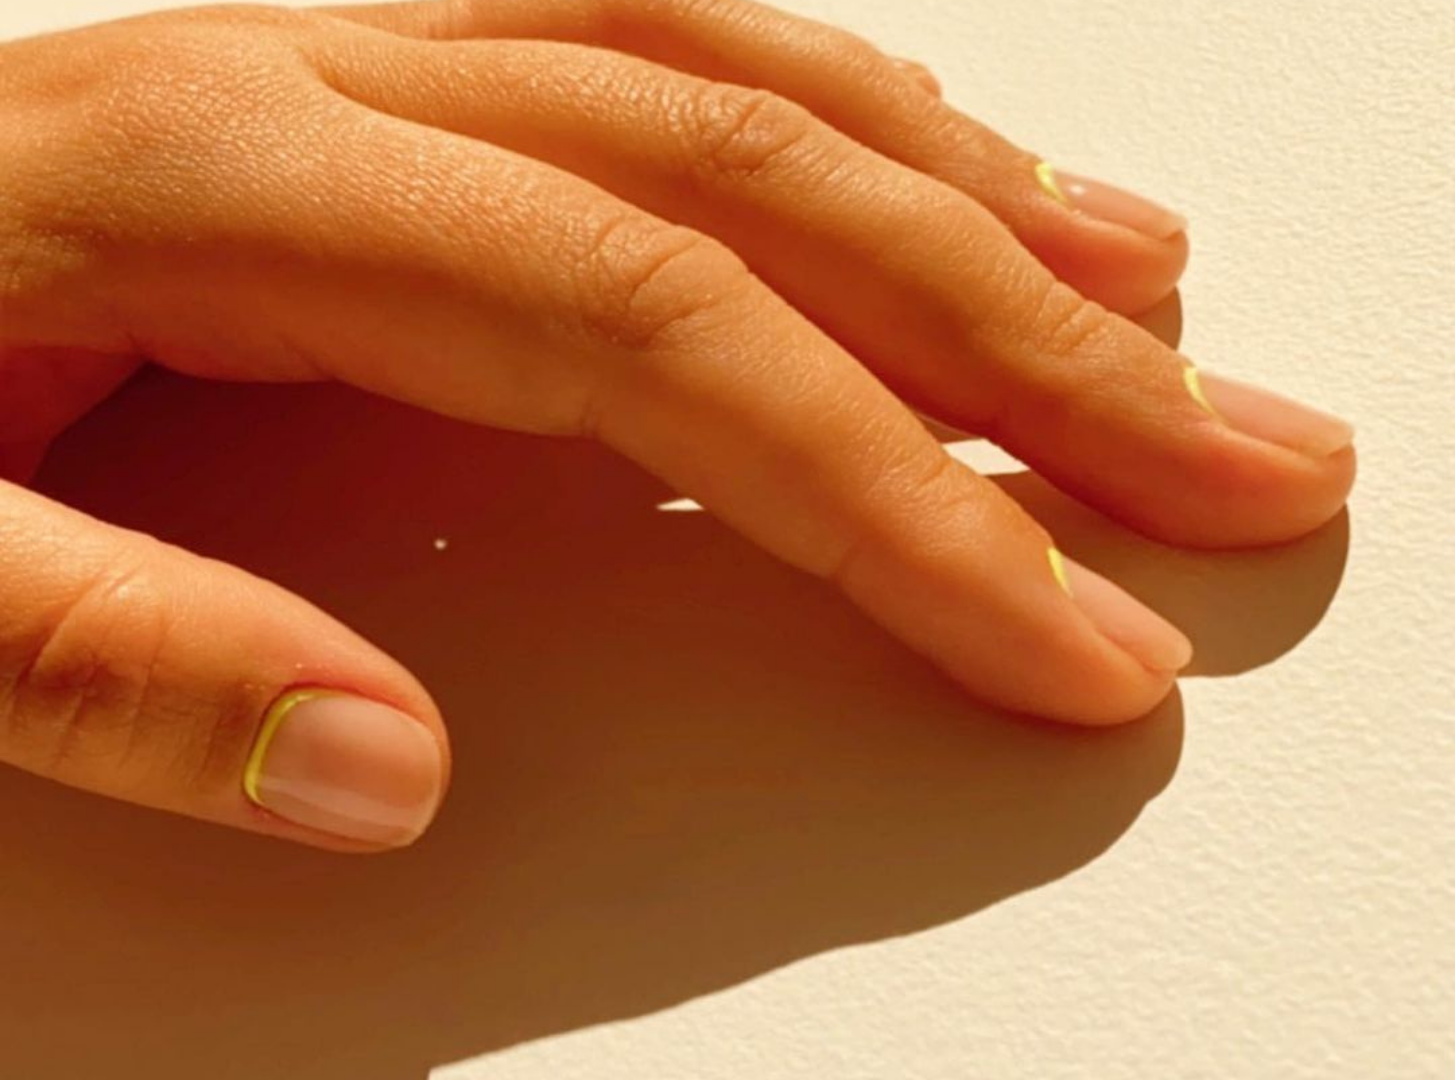 How to Shake Up Your Home Manicure Routine